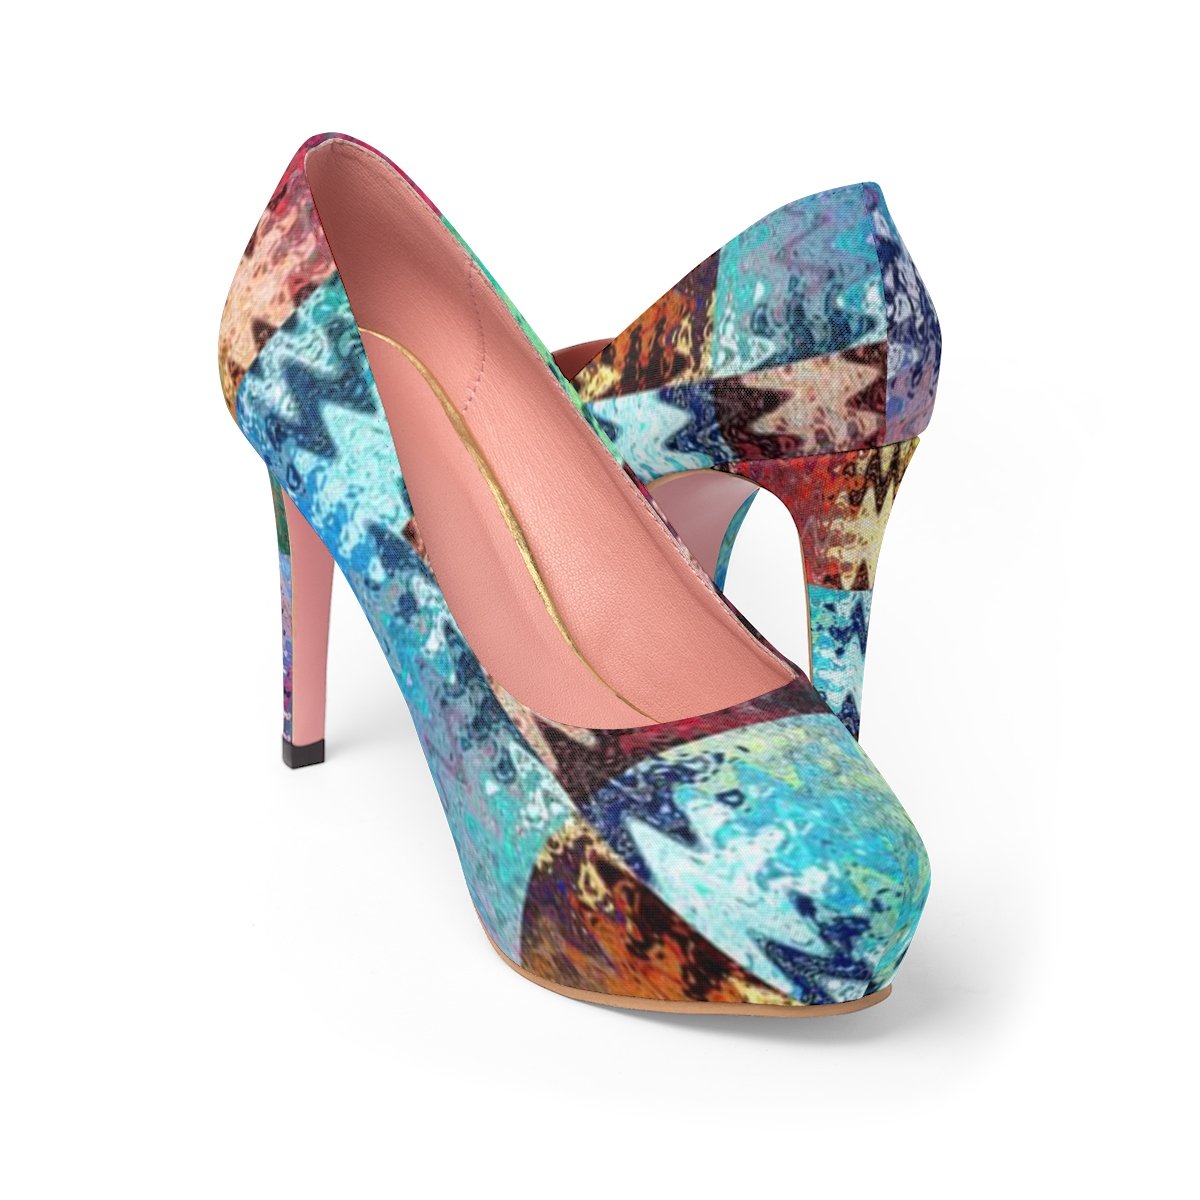 Buy Multi Colored Heels Online In India - Etsy India